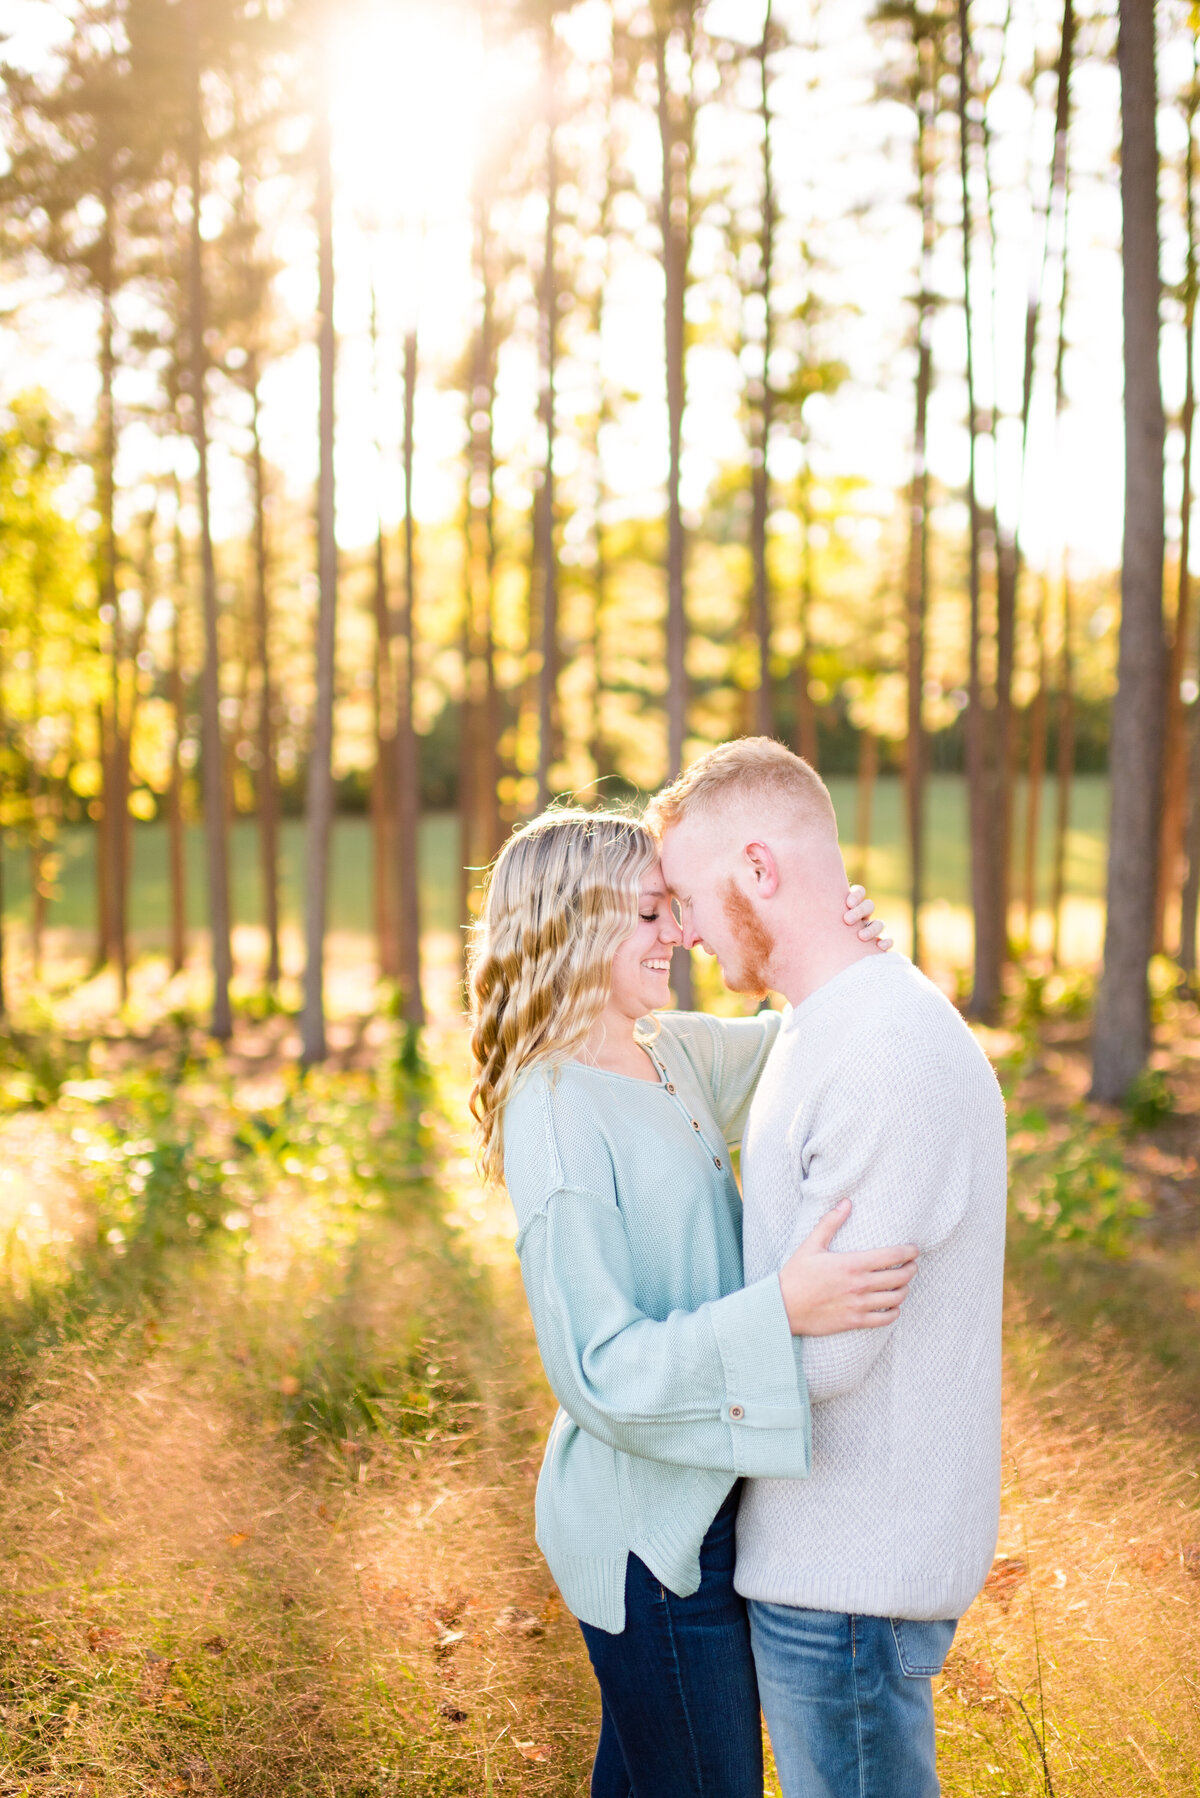 Haley + Andrew Engagements - Photography by Gerri Anna-27